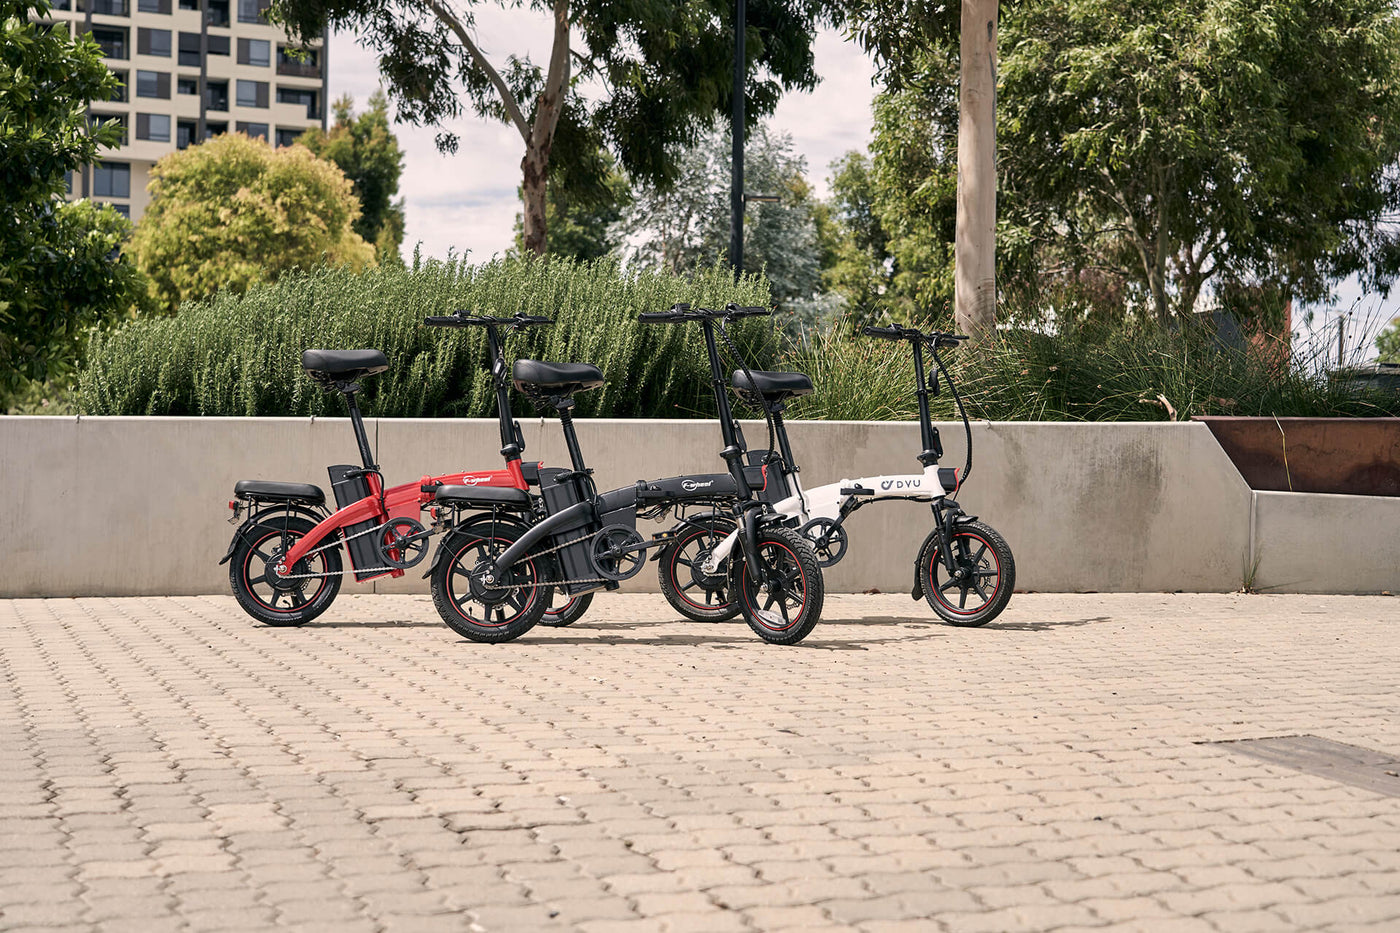 DYU A5 Electric Bike range, three different colours, red, black and white. Outdoors in the sun